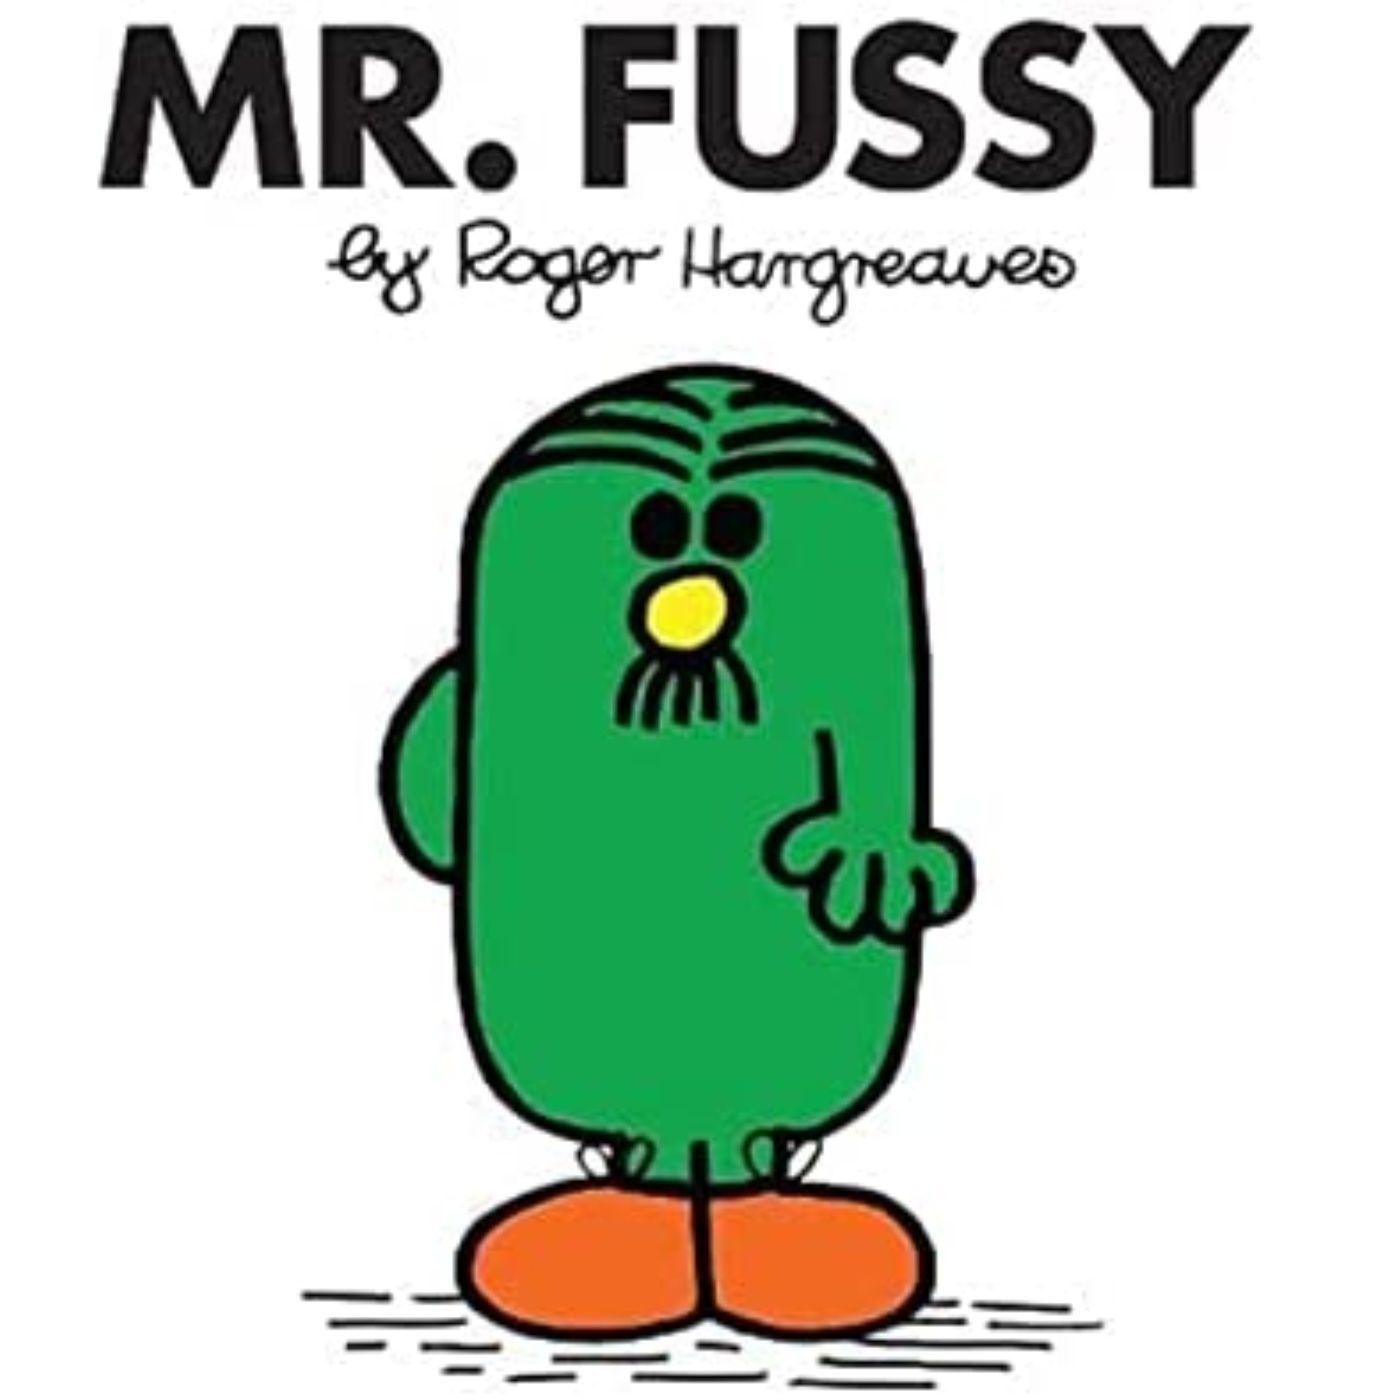 Mr. Fussy by Roger Hargreaves 21 of 24 Tribute - Read by Martyn Kenneth